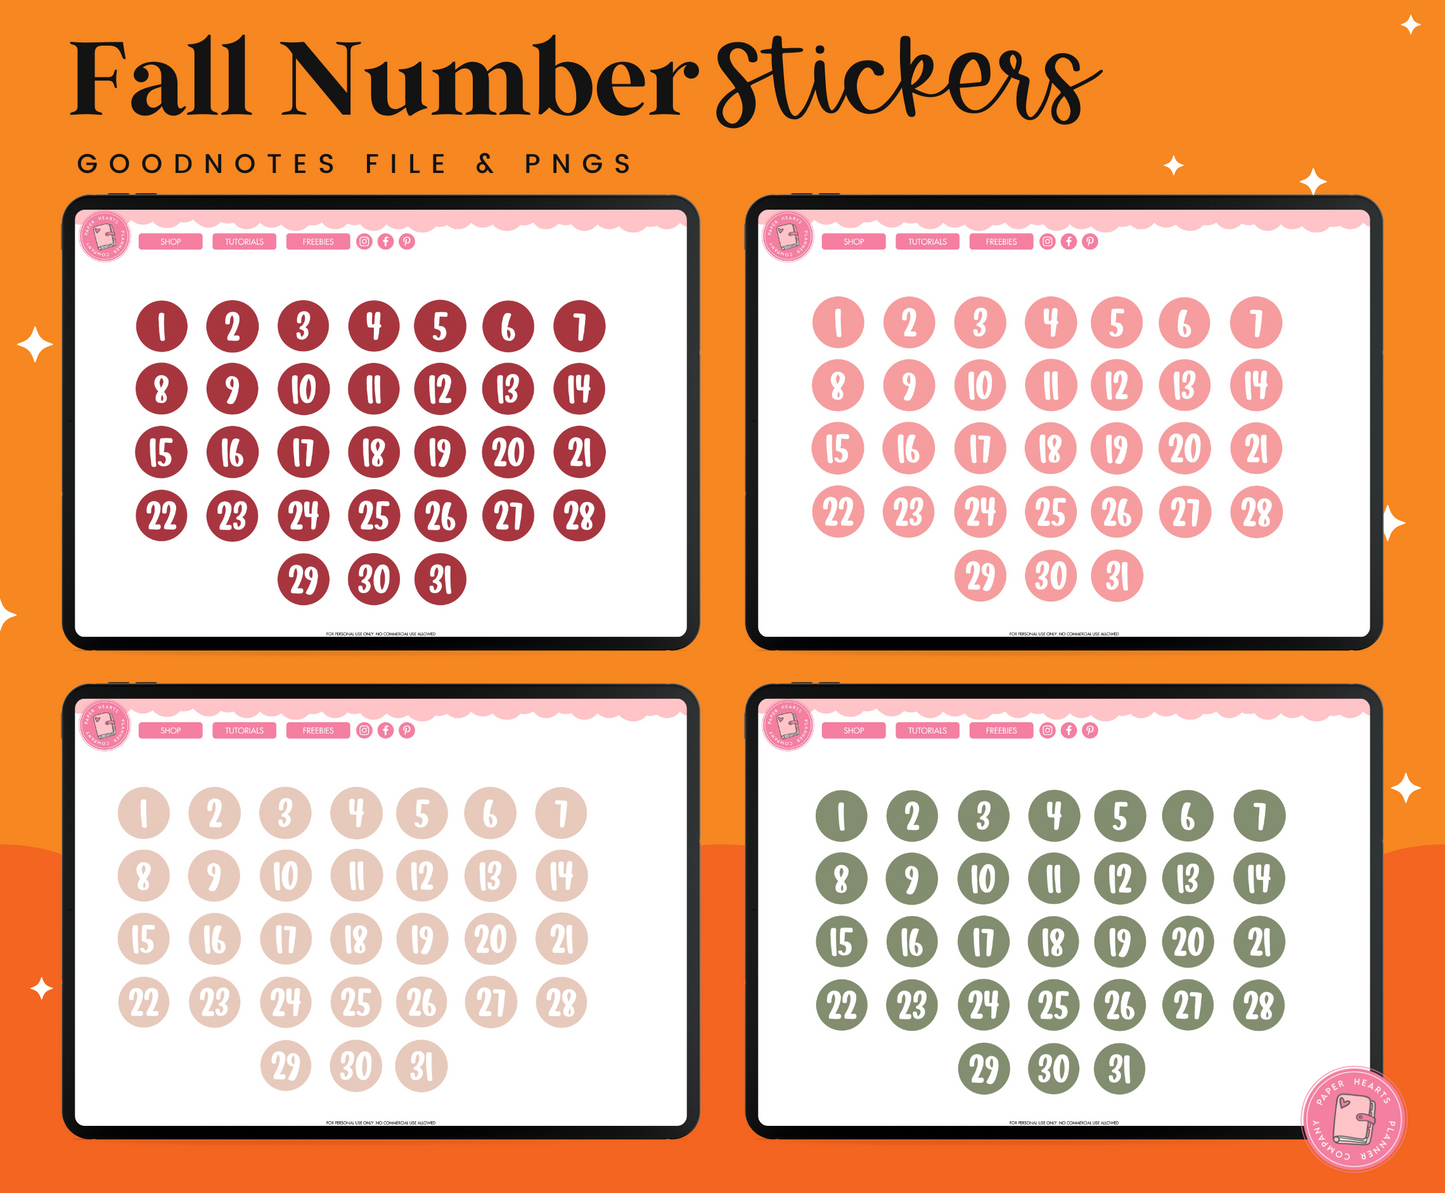 Fall Numbers Stickers